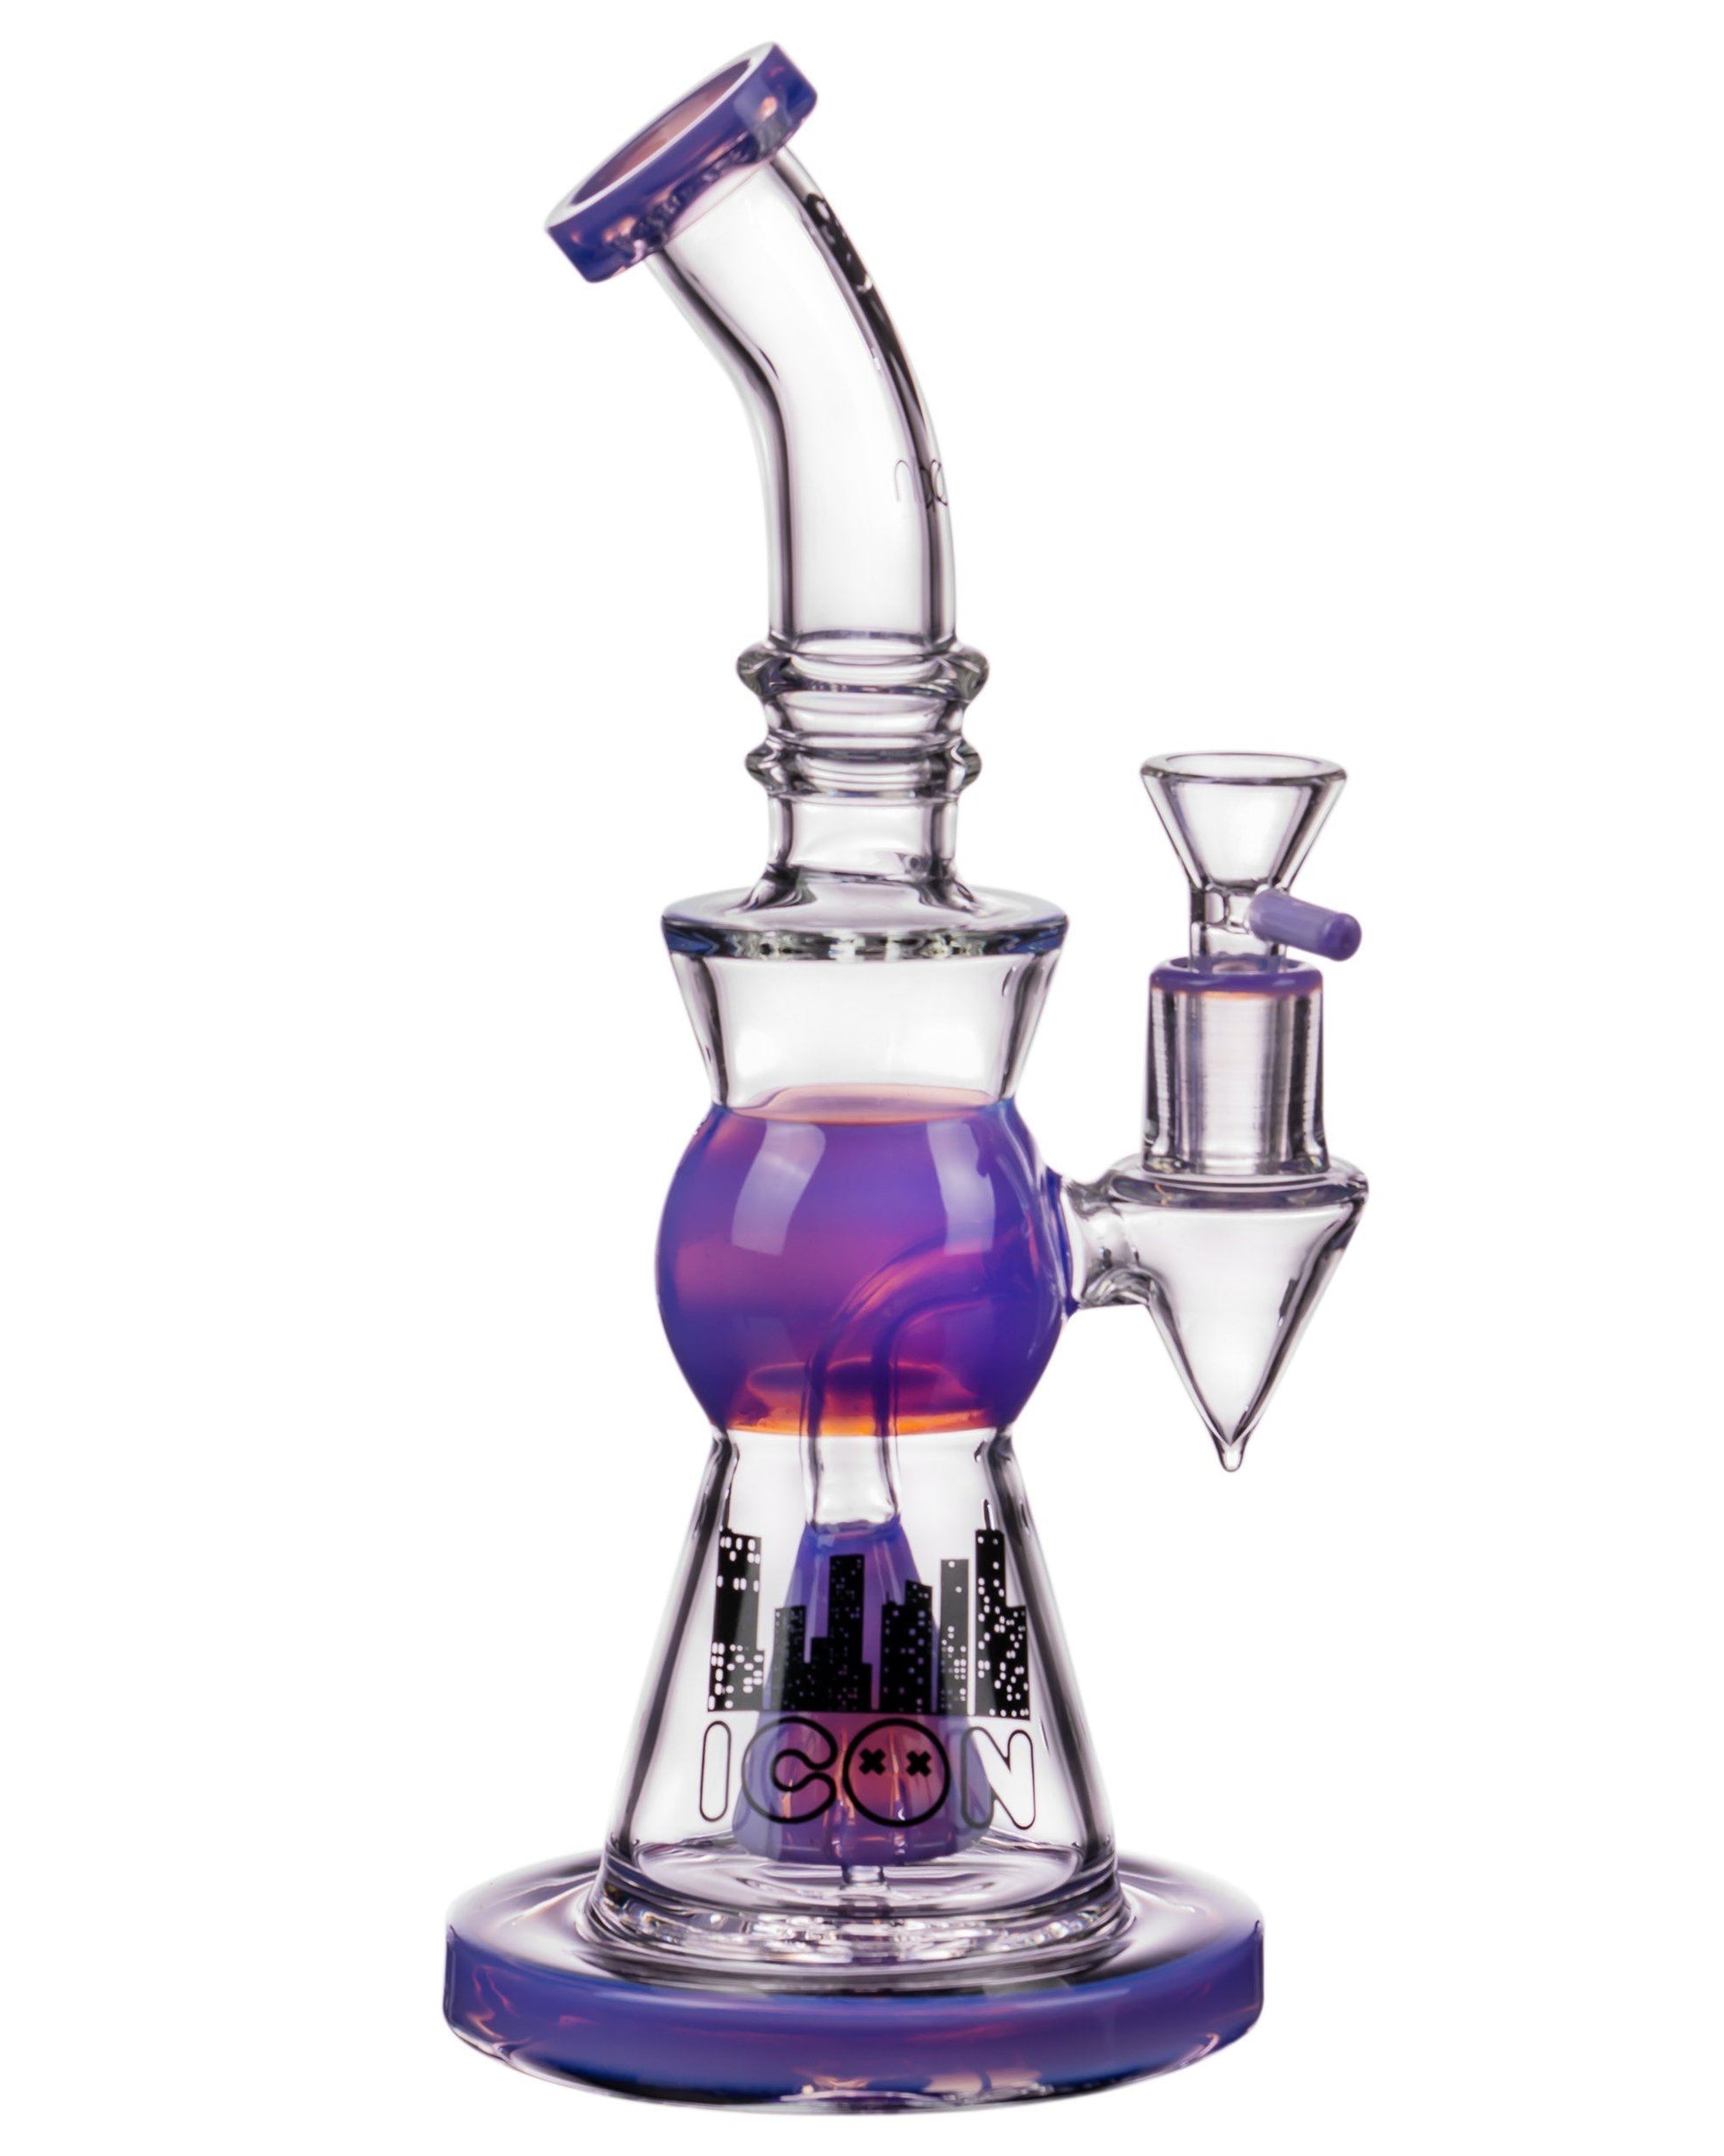 Icon Slyme Accented Cone Perc Bong